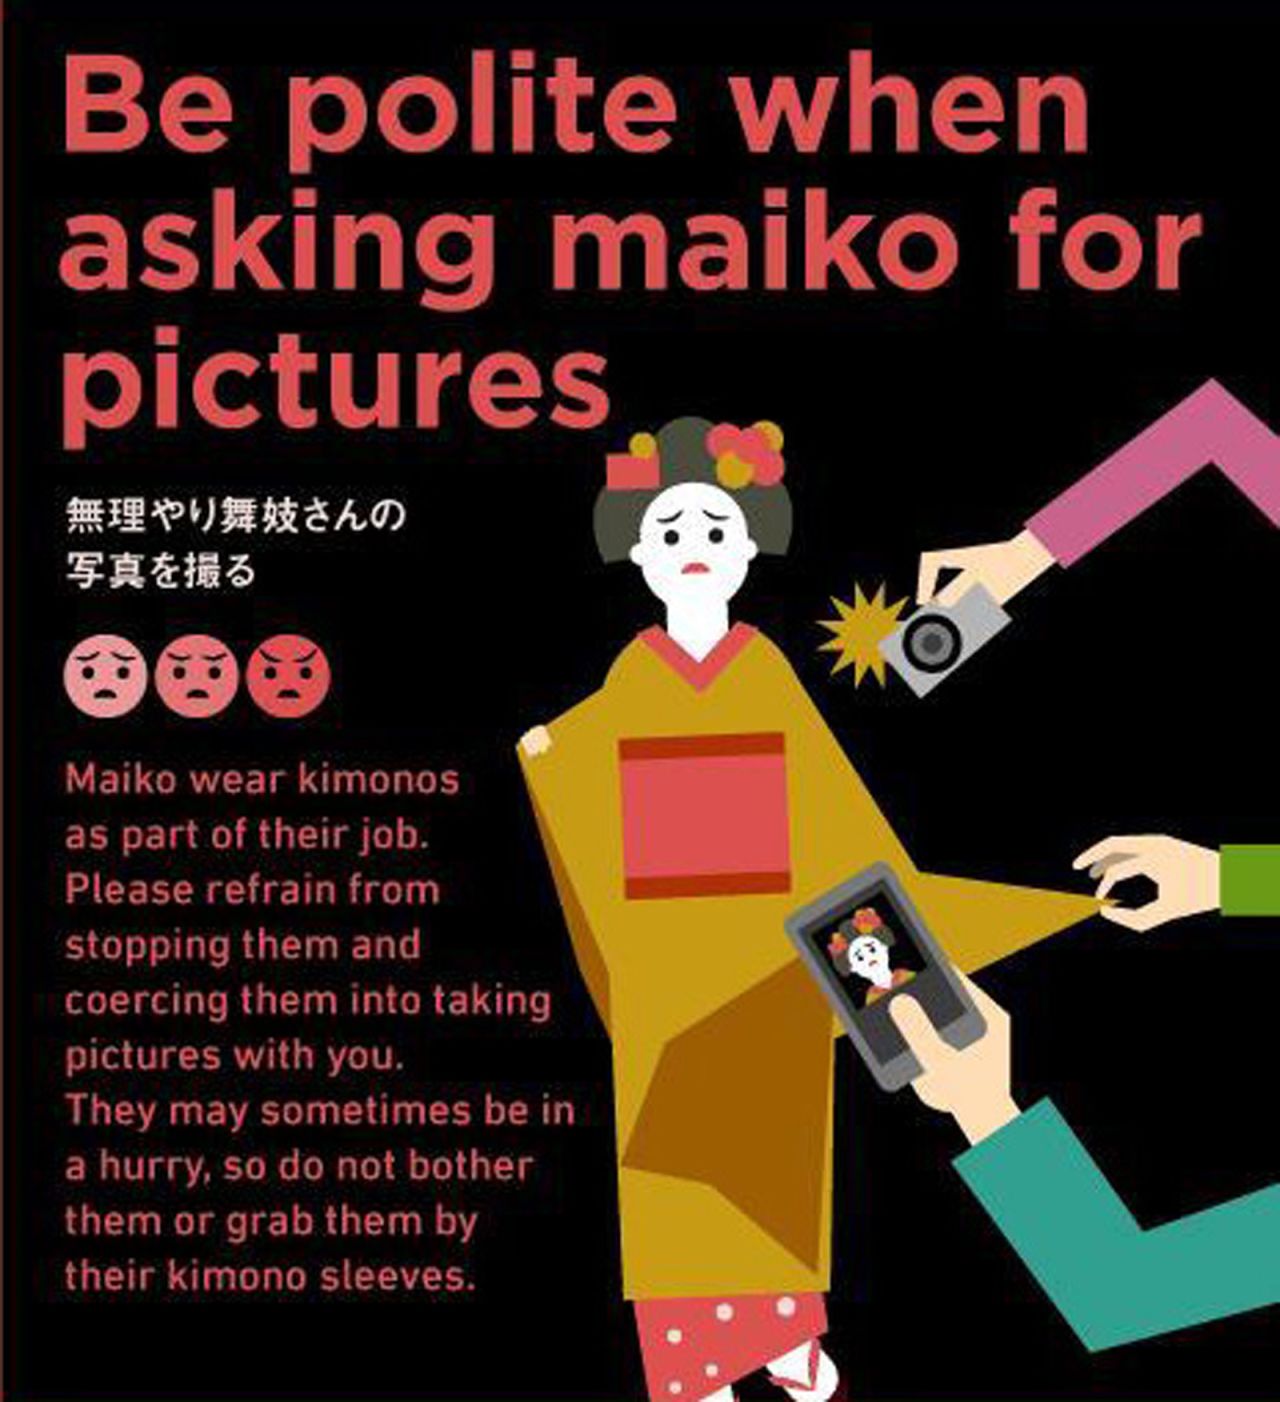 Taking pictures of geisha and maiko (apprentice dancers) is a must for many travelers. The guide urges travelers to refrain from interfering with maikos going about their business, or coercing them into posing for photos. 